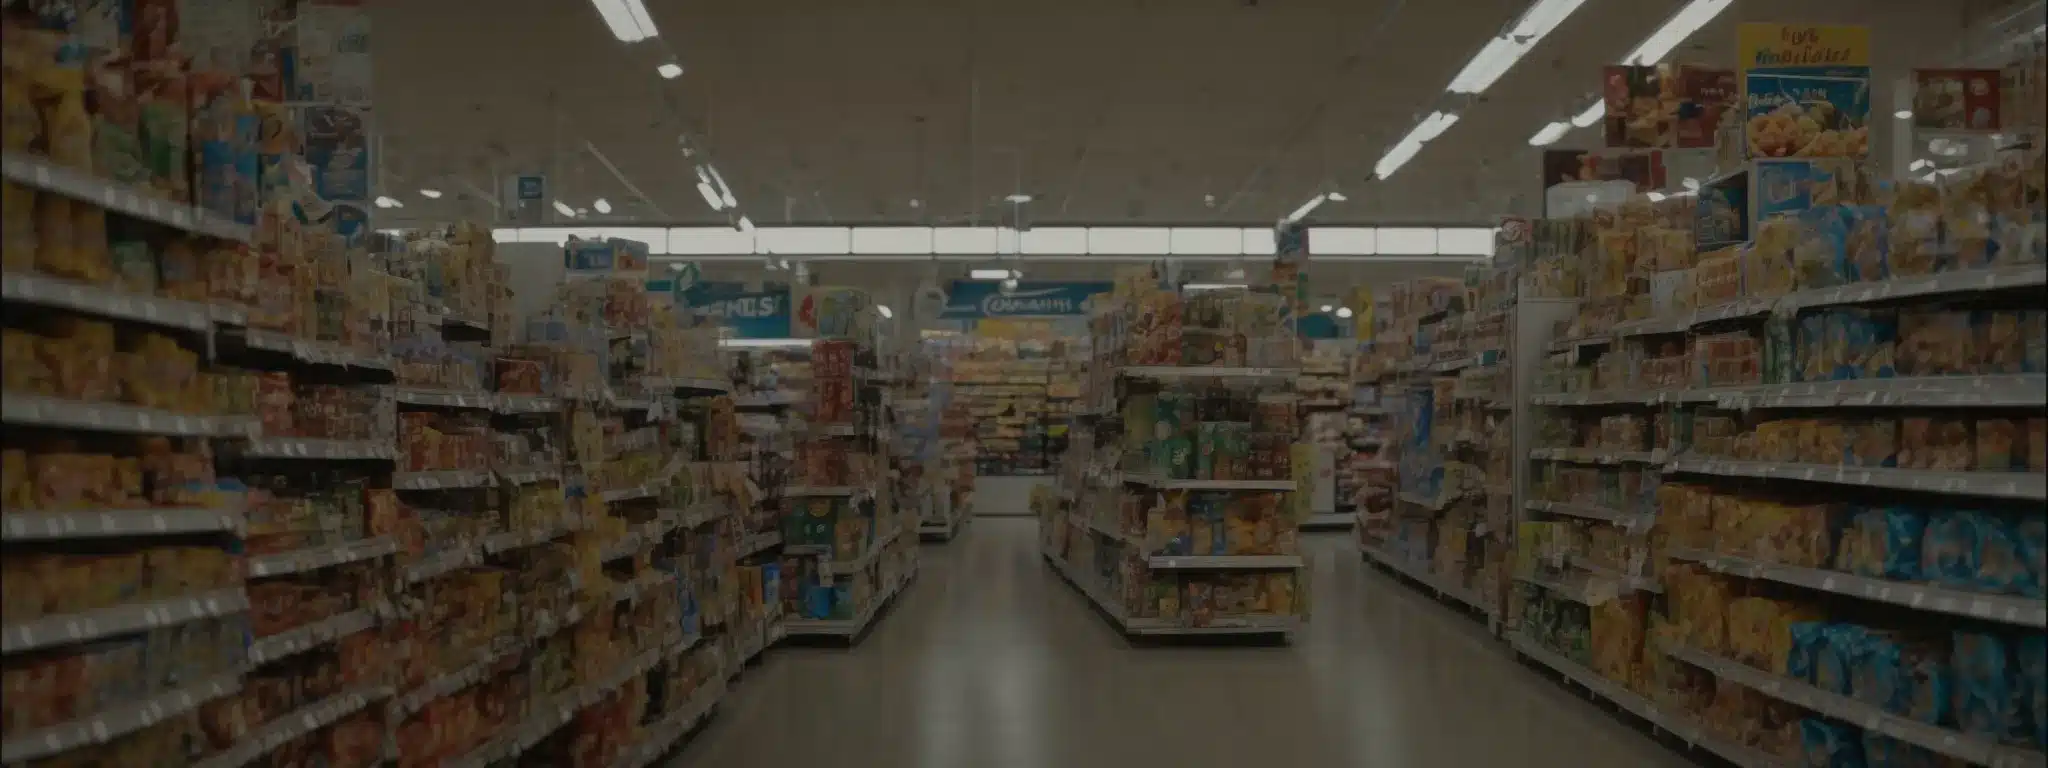 An Aisle In A Store Filled With A Variety Of Packaged Products, Each Vying For The Attention Of Shoppers.